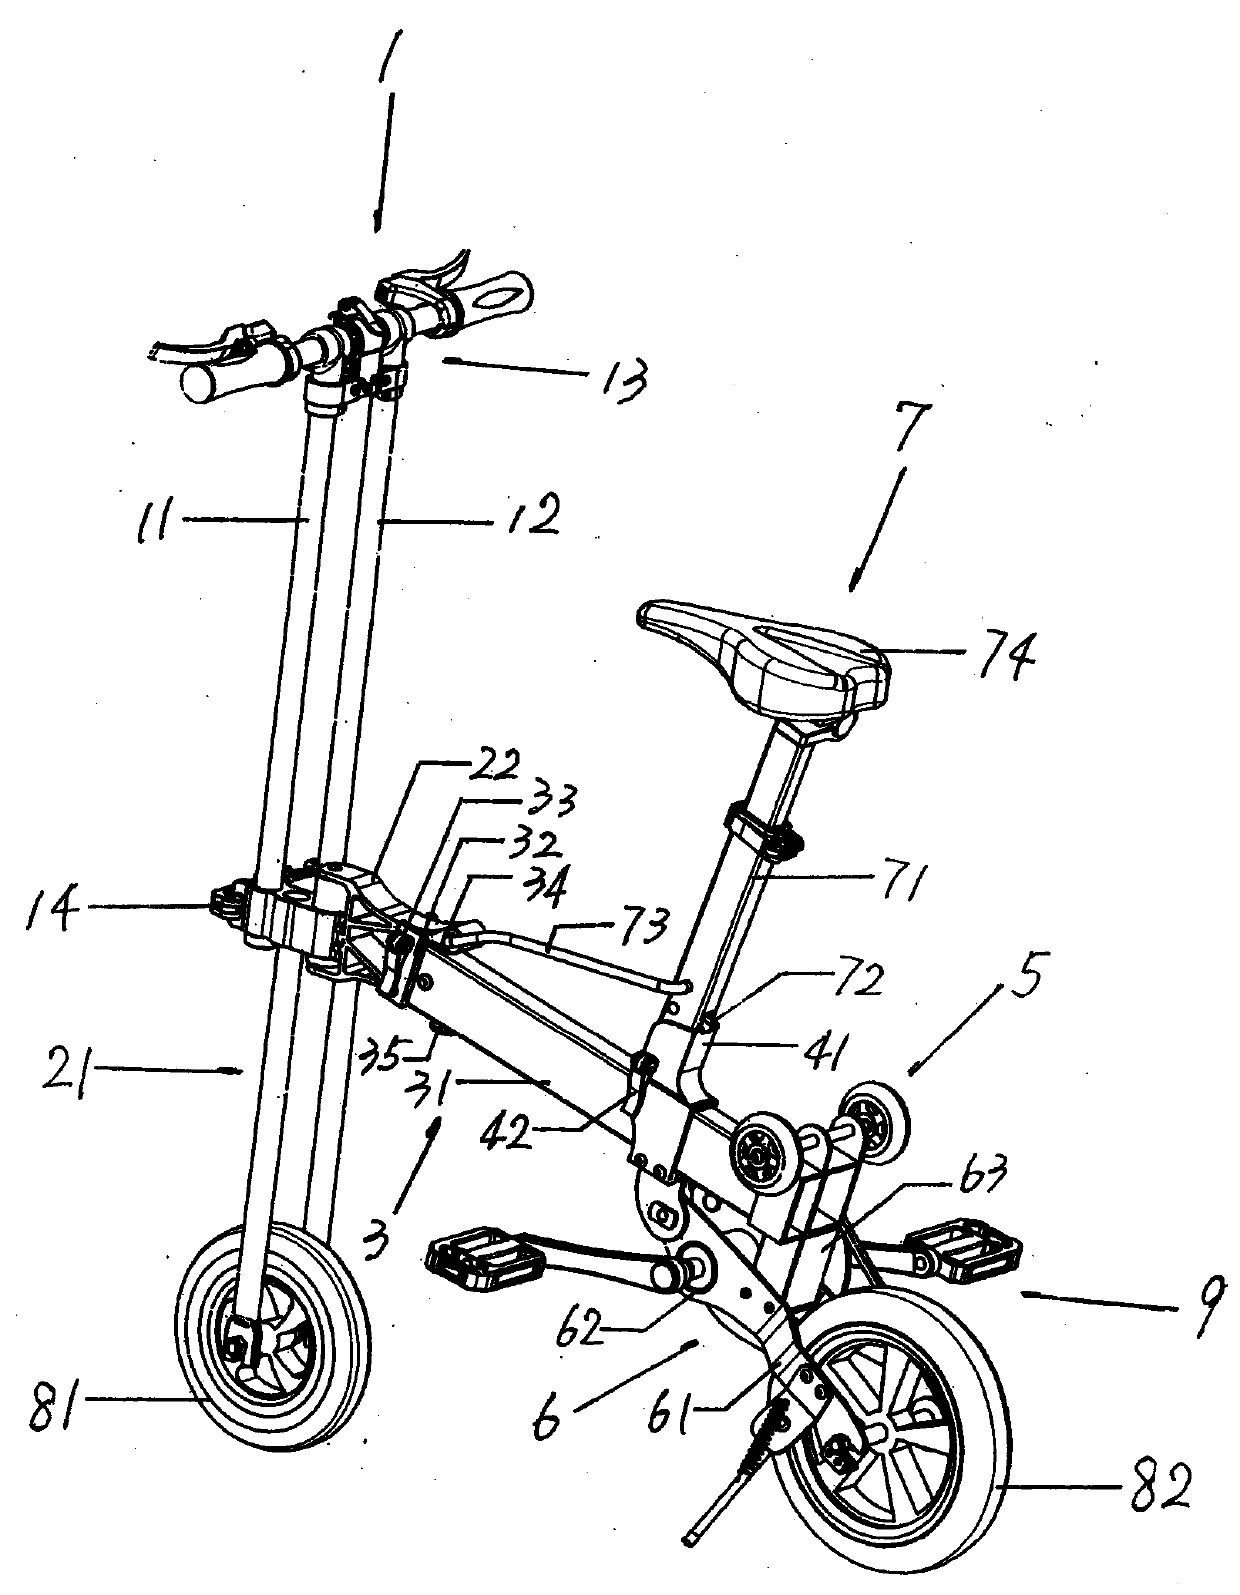 Magnetic-folding positioning portable bicycle